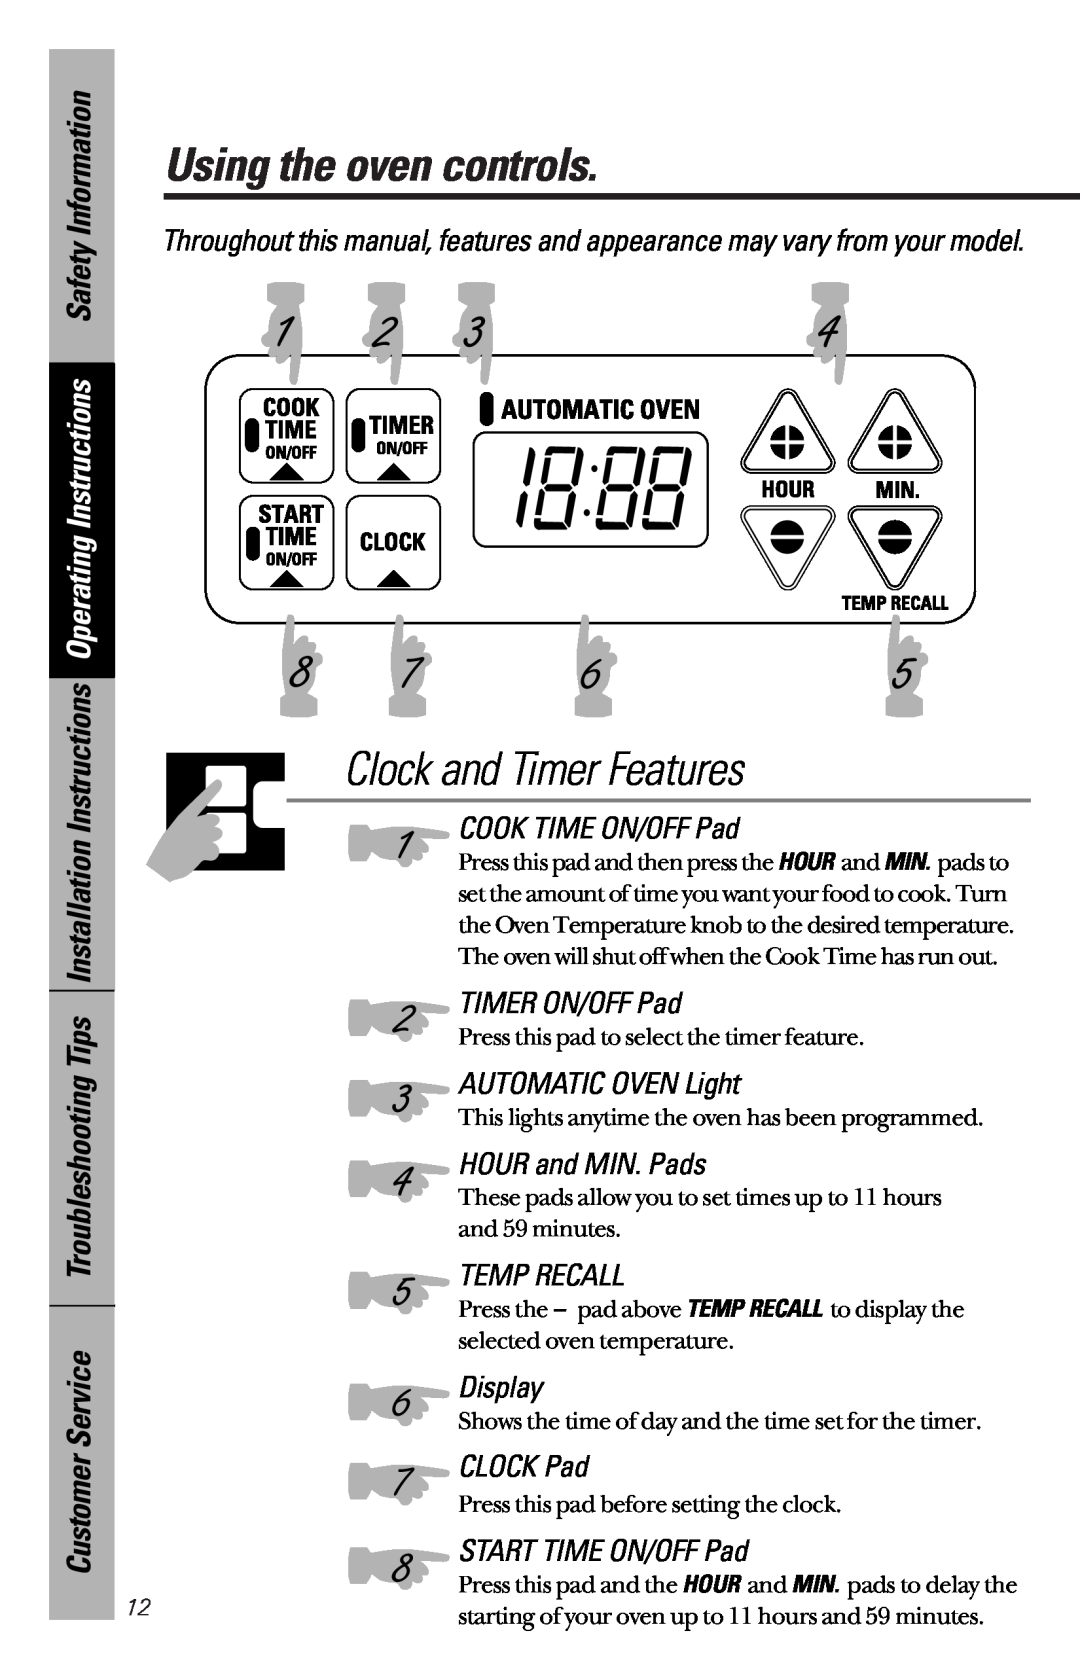 GE 164D3333P172 Using the oven controls, Clock and Timer Features, COOK TIME ON/OFF Pad, TIMER ON/OFF Pad, Temp Recall 